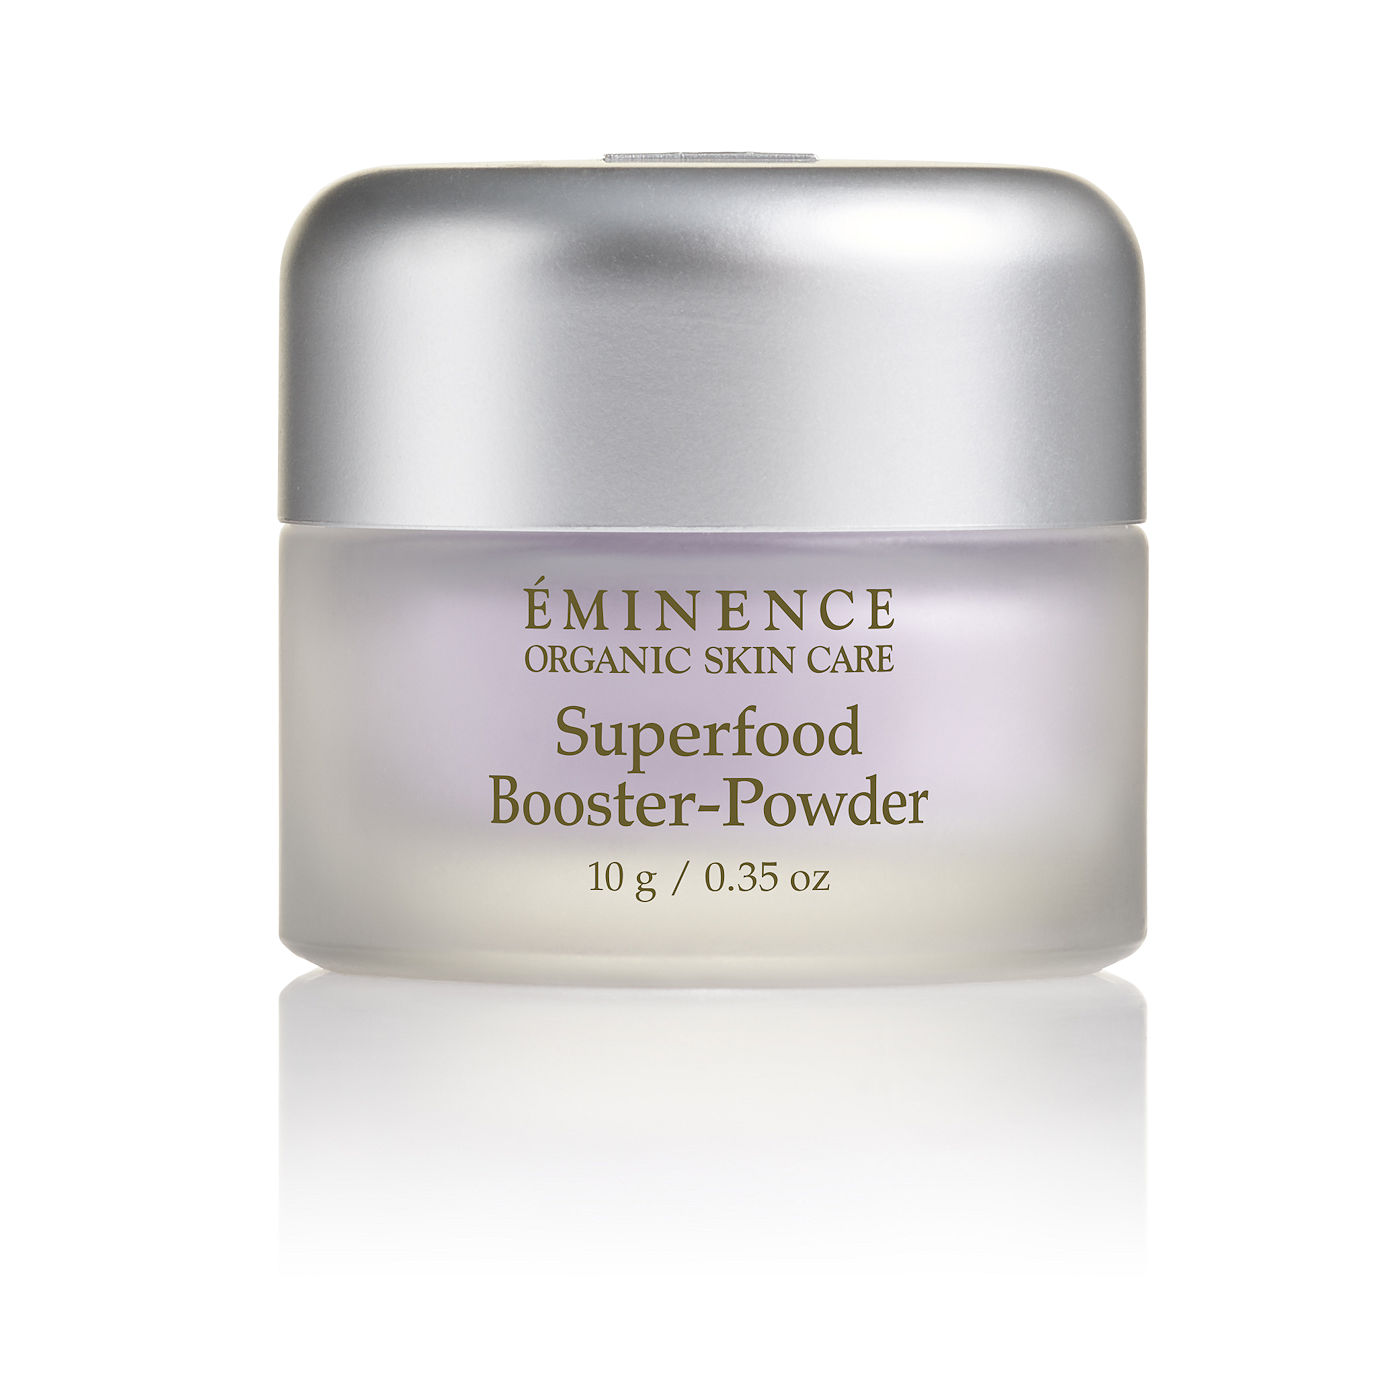 Superfood Booster-Powder - Eminence Organic Skin Care from The Spa Within in Detroit Lakes, MN 